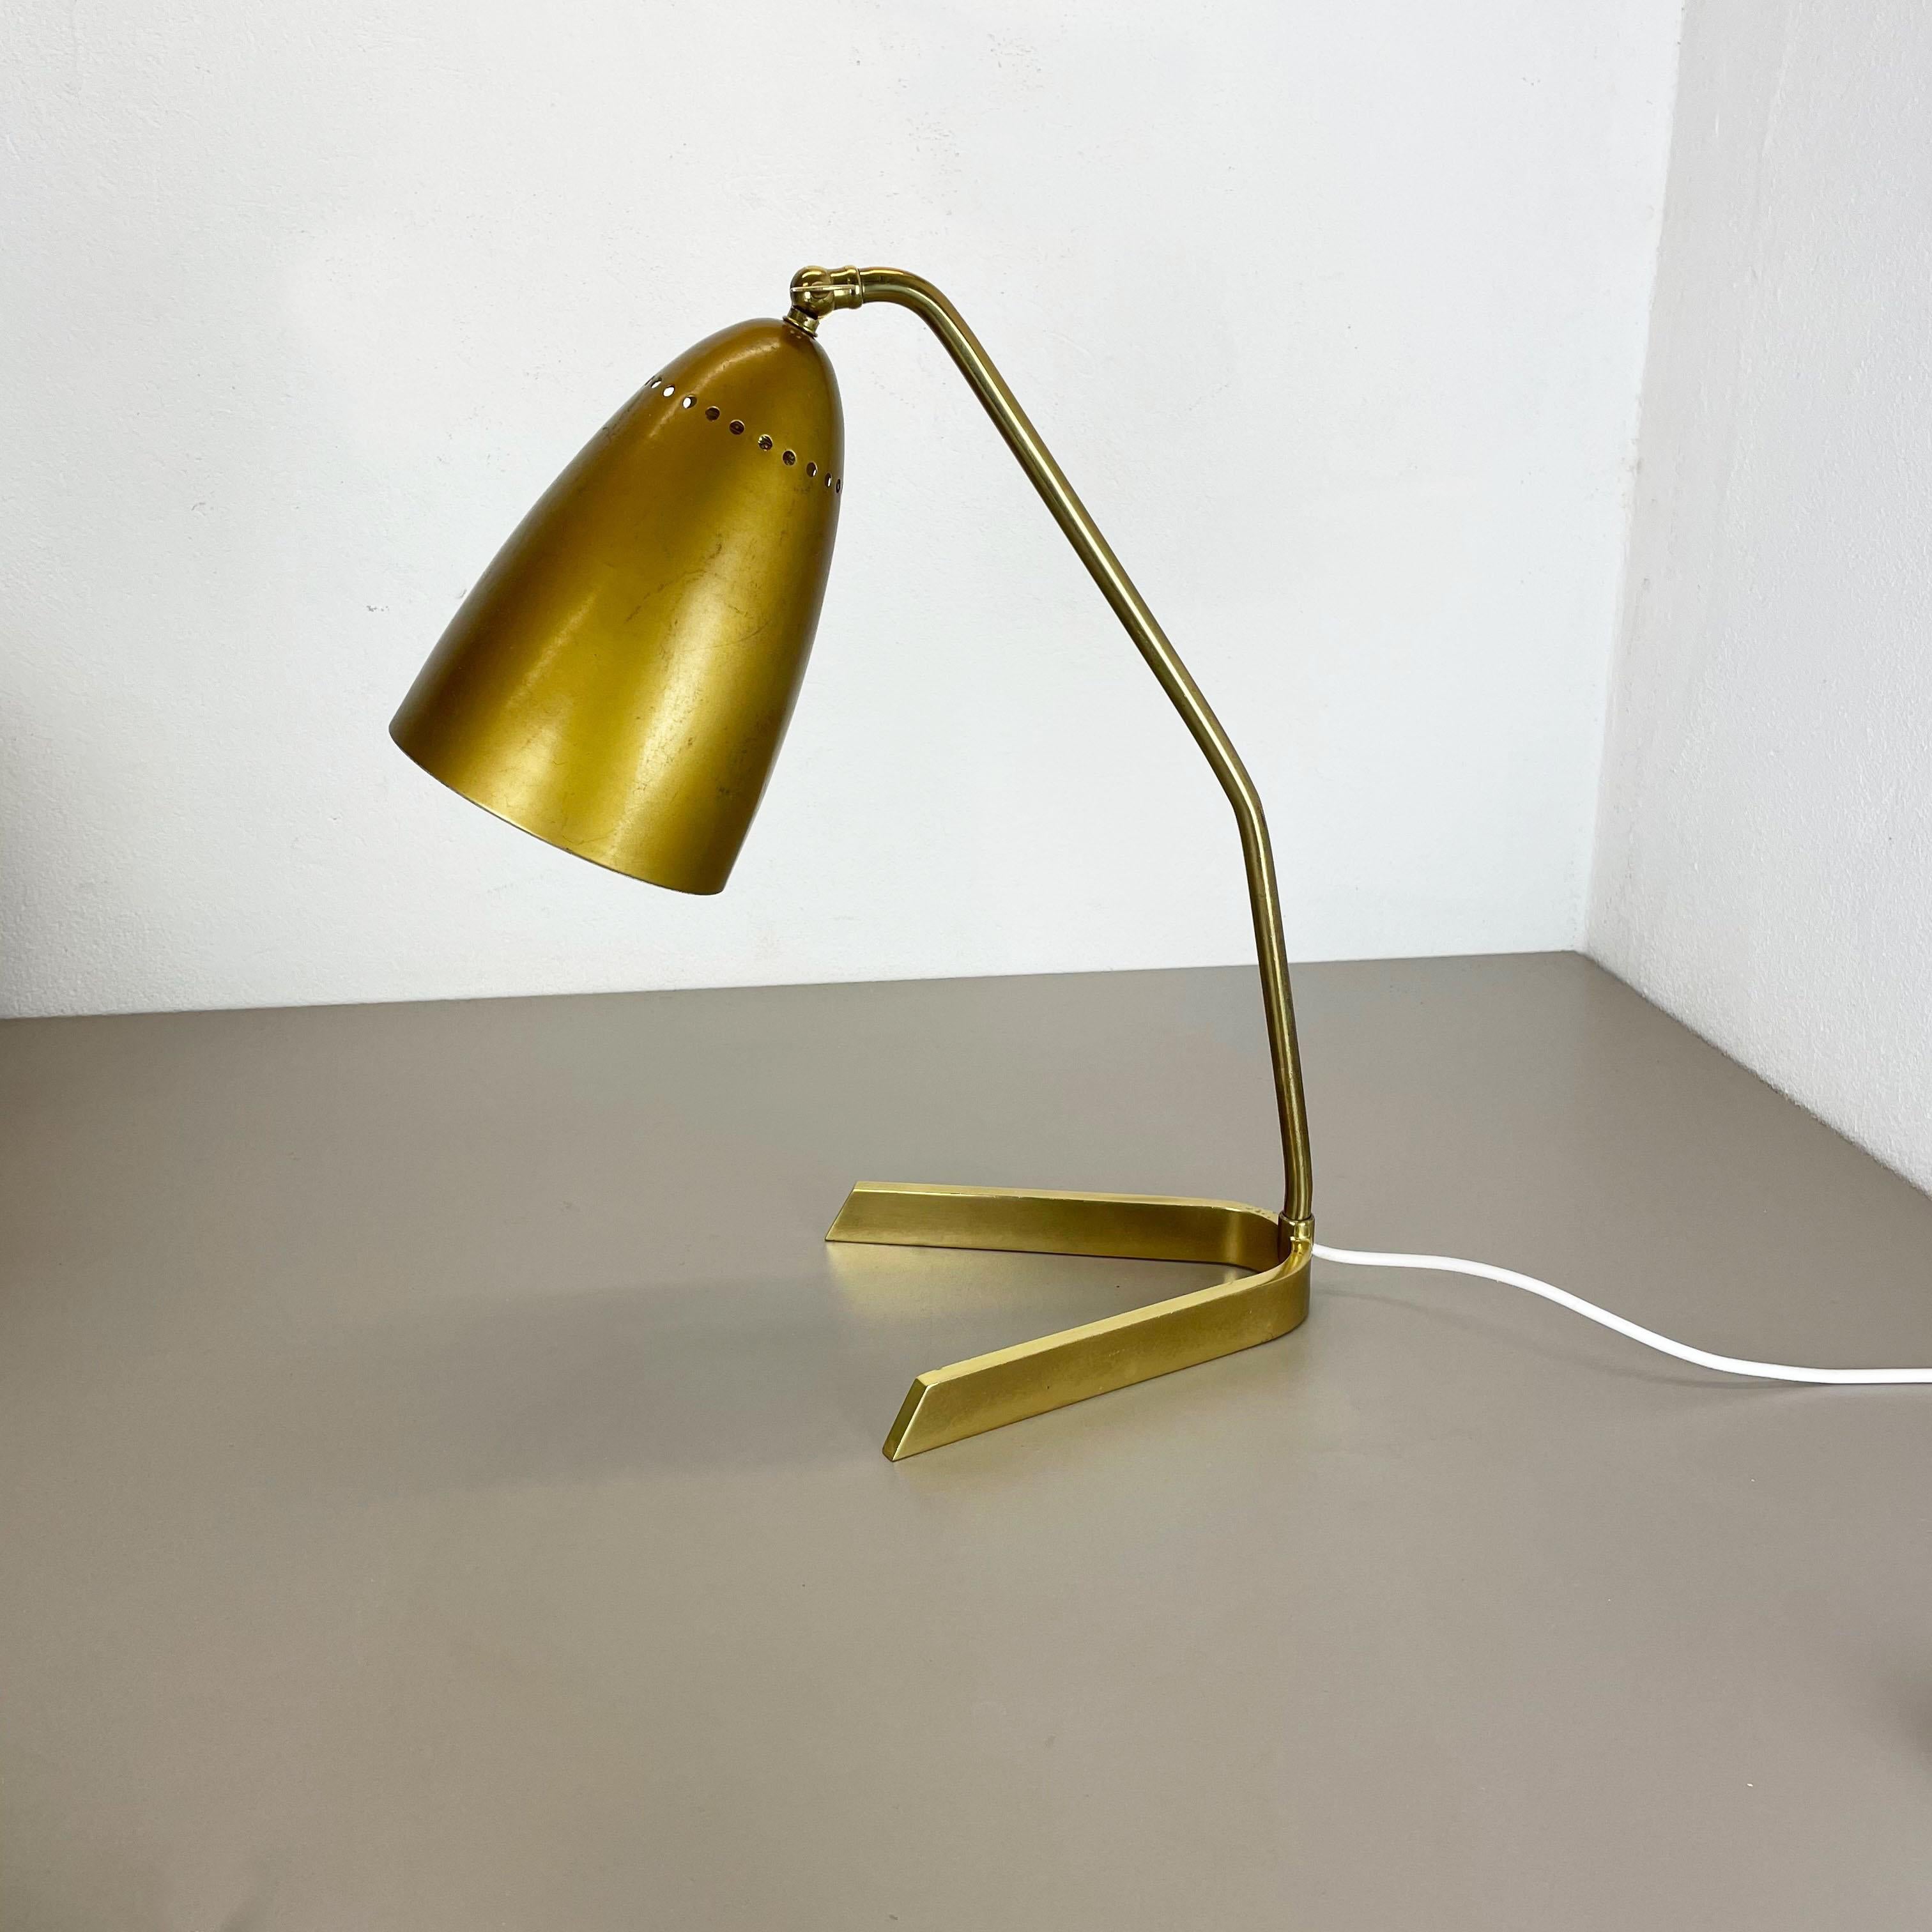 Article:

Table light


Origin:

Austria


Age:

1950s


This original vintage table light was designed and produced in the 1950s in Austria. The super rare and Minimalist V form stand element is made of brass. The light features its